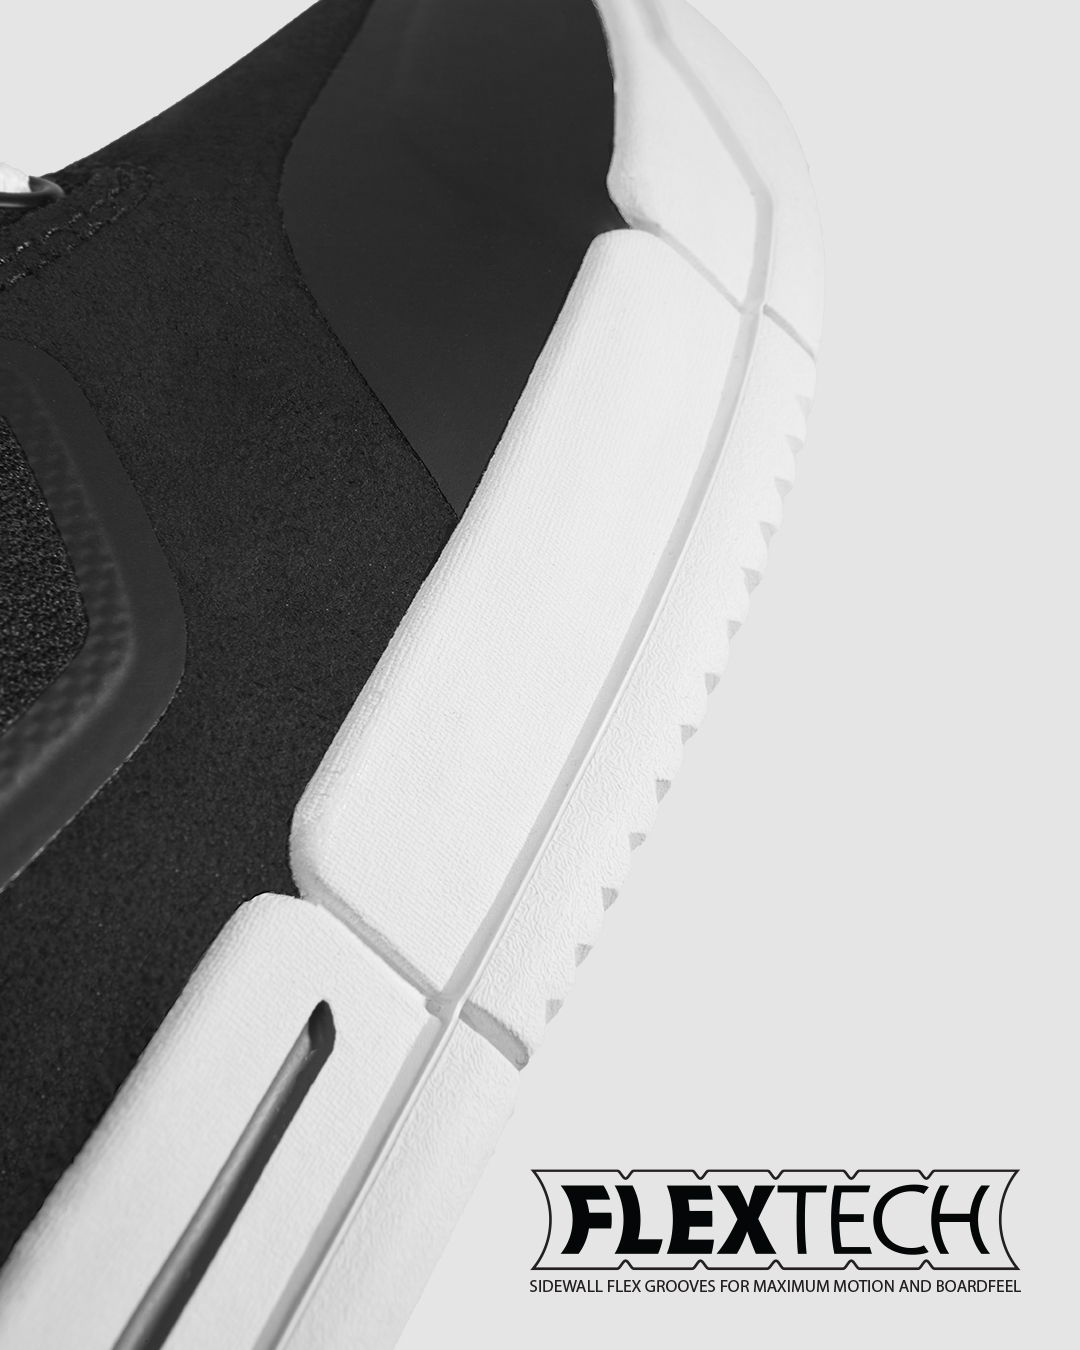 https://emerica.com/collections/footwear/products/phocus-g6-black-white-gold-6101000151-715